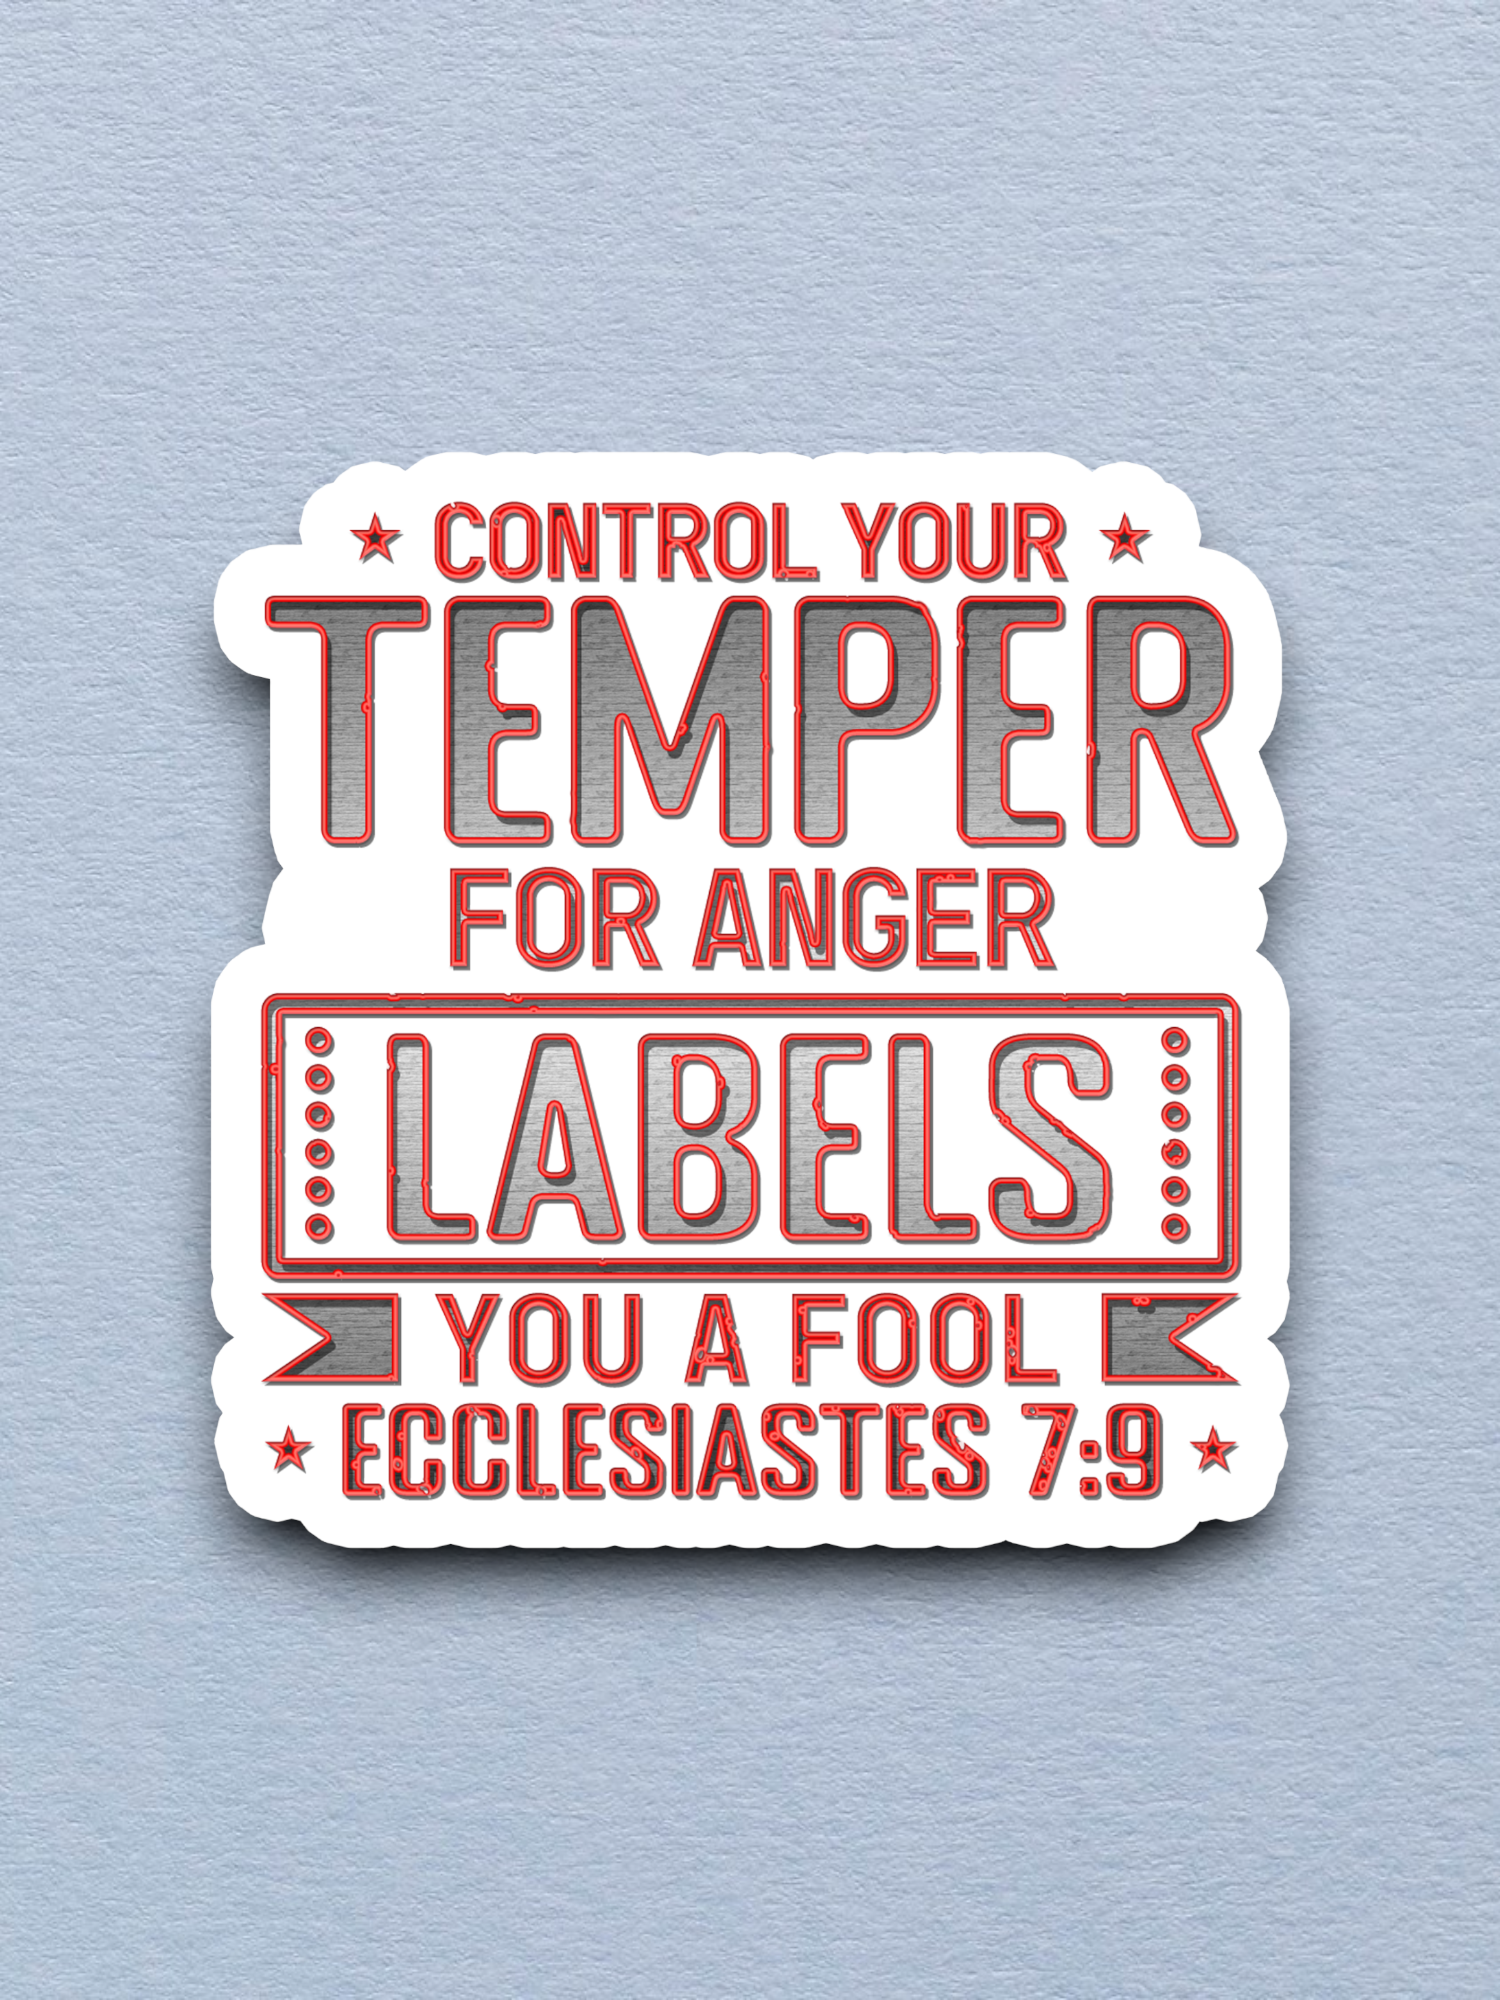 Control Your Temper For Anger Labels You - Faith Sticker